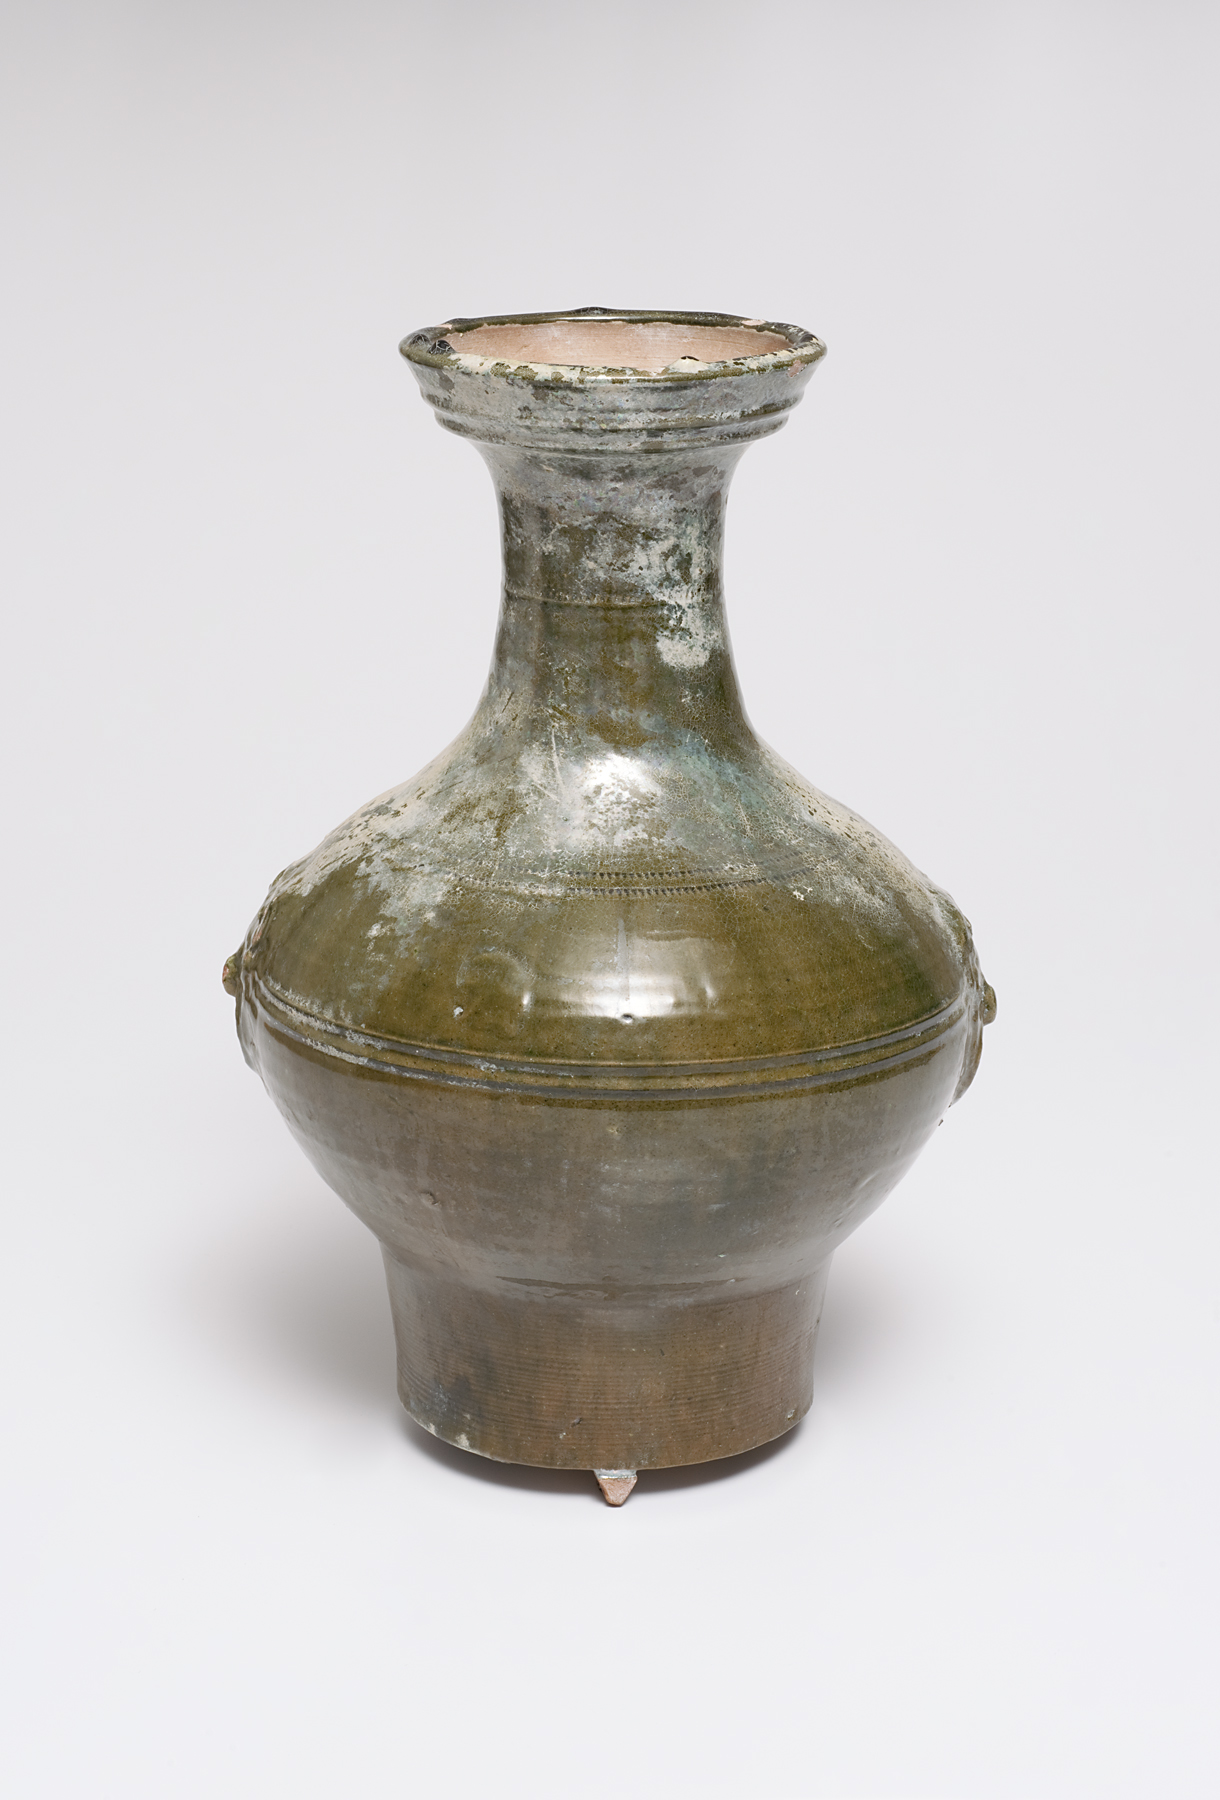 hu-shaped funerary vase (one of a pair)